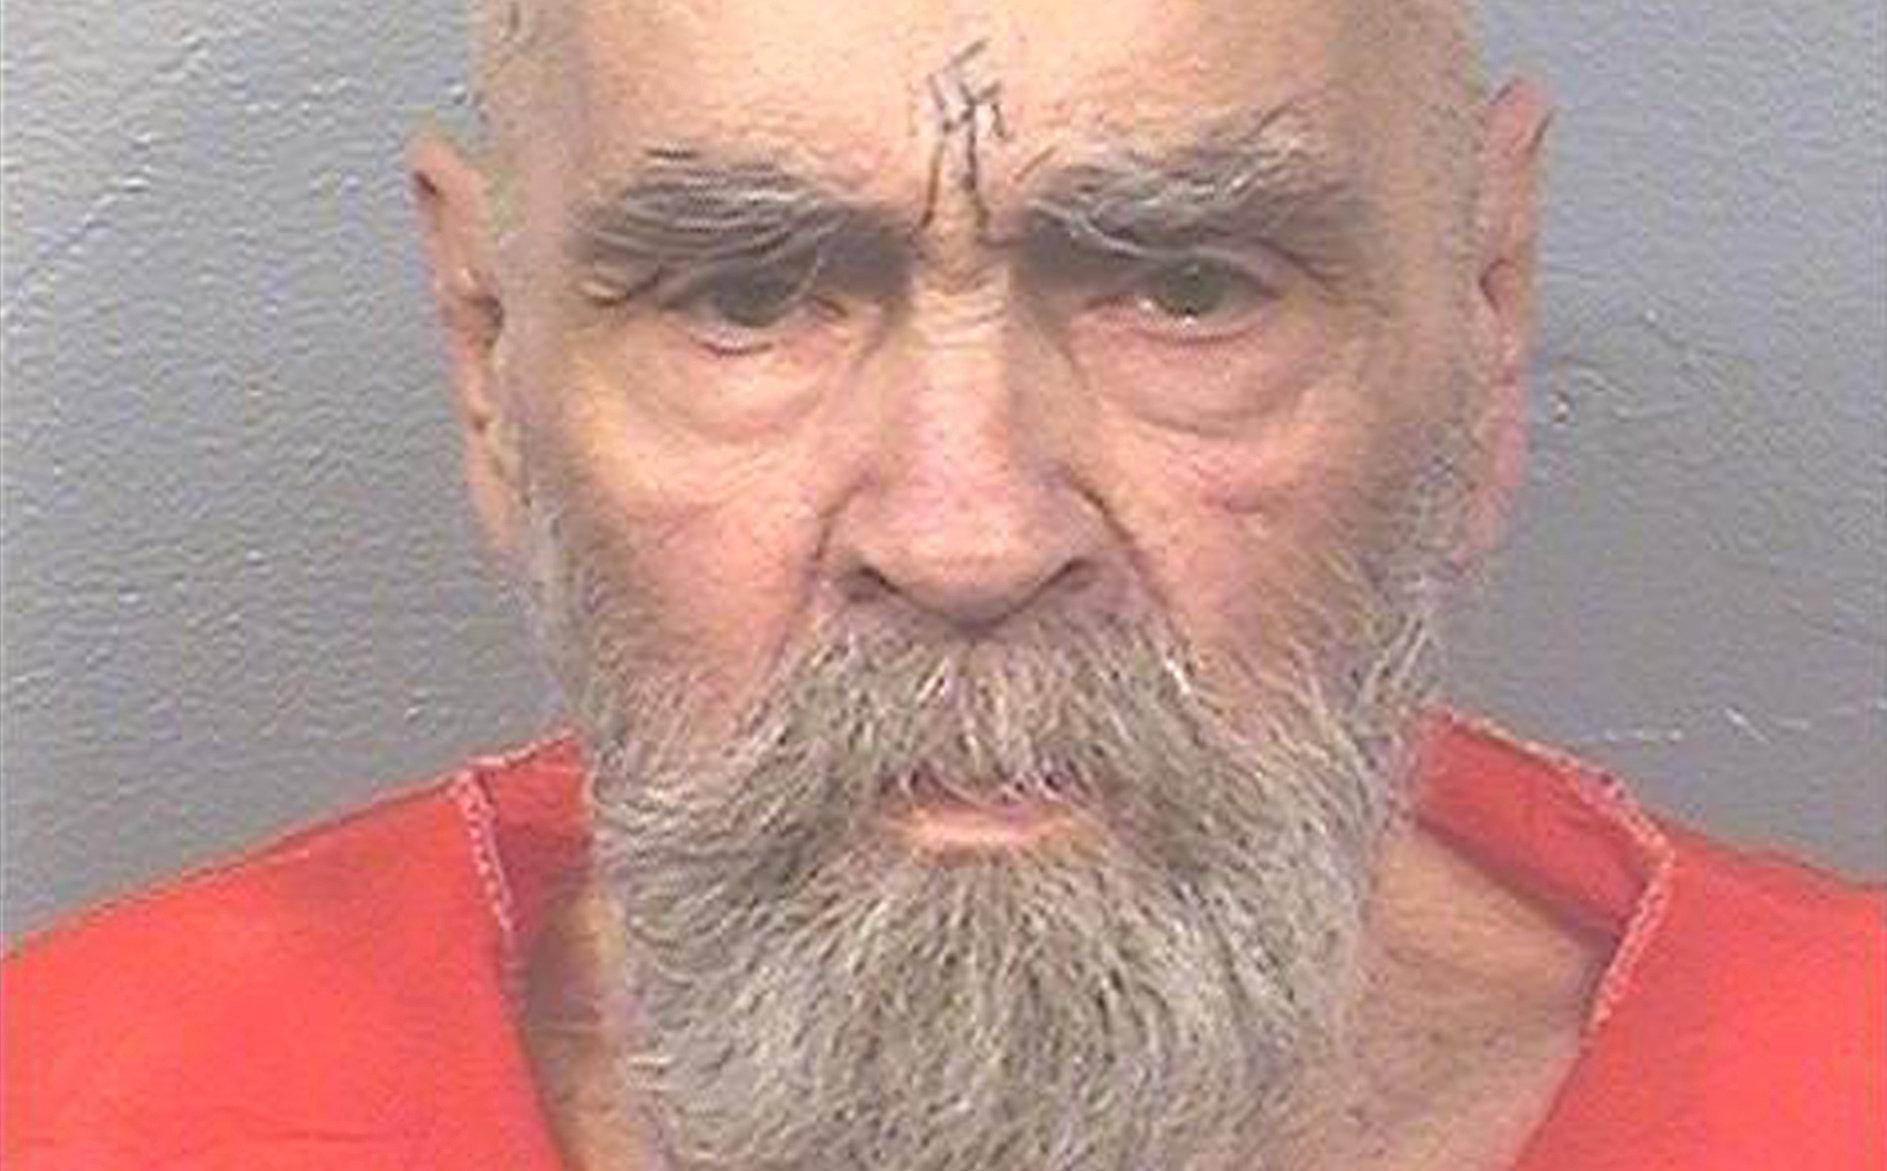 FILE PHOTO: California Department of Corrections and Rehabilitation photo of Charles Manson